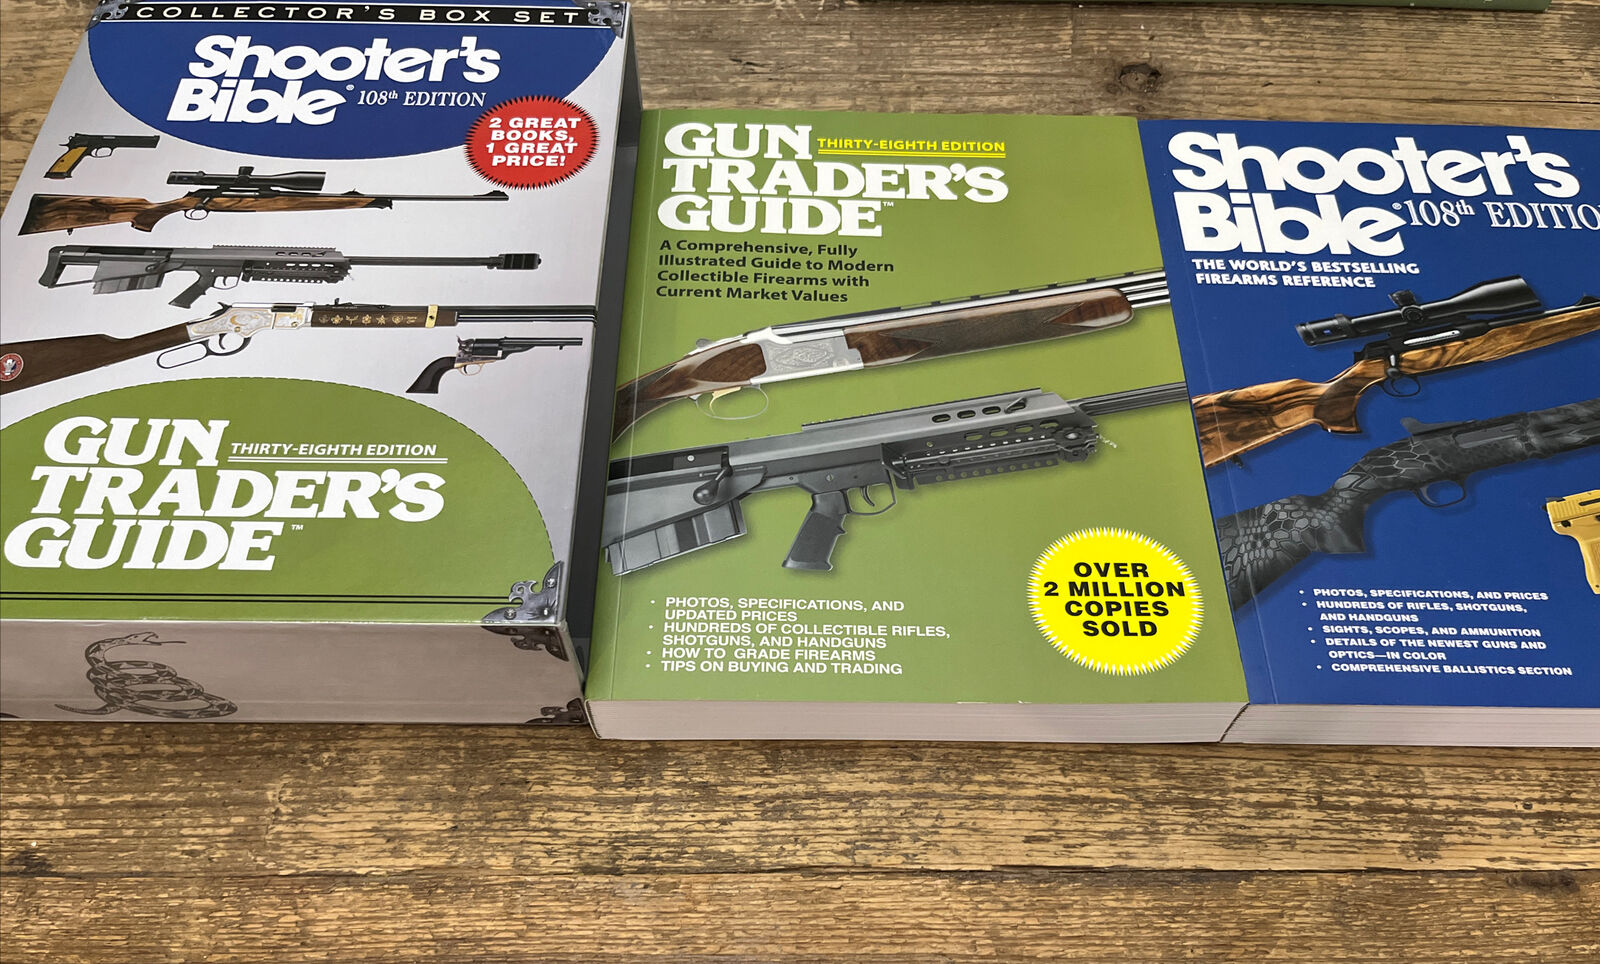 Shooter s Bible 108th Edition Collector s Box Set